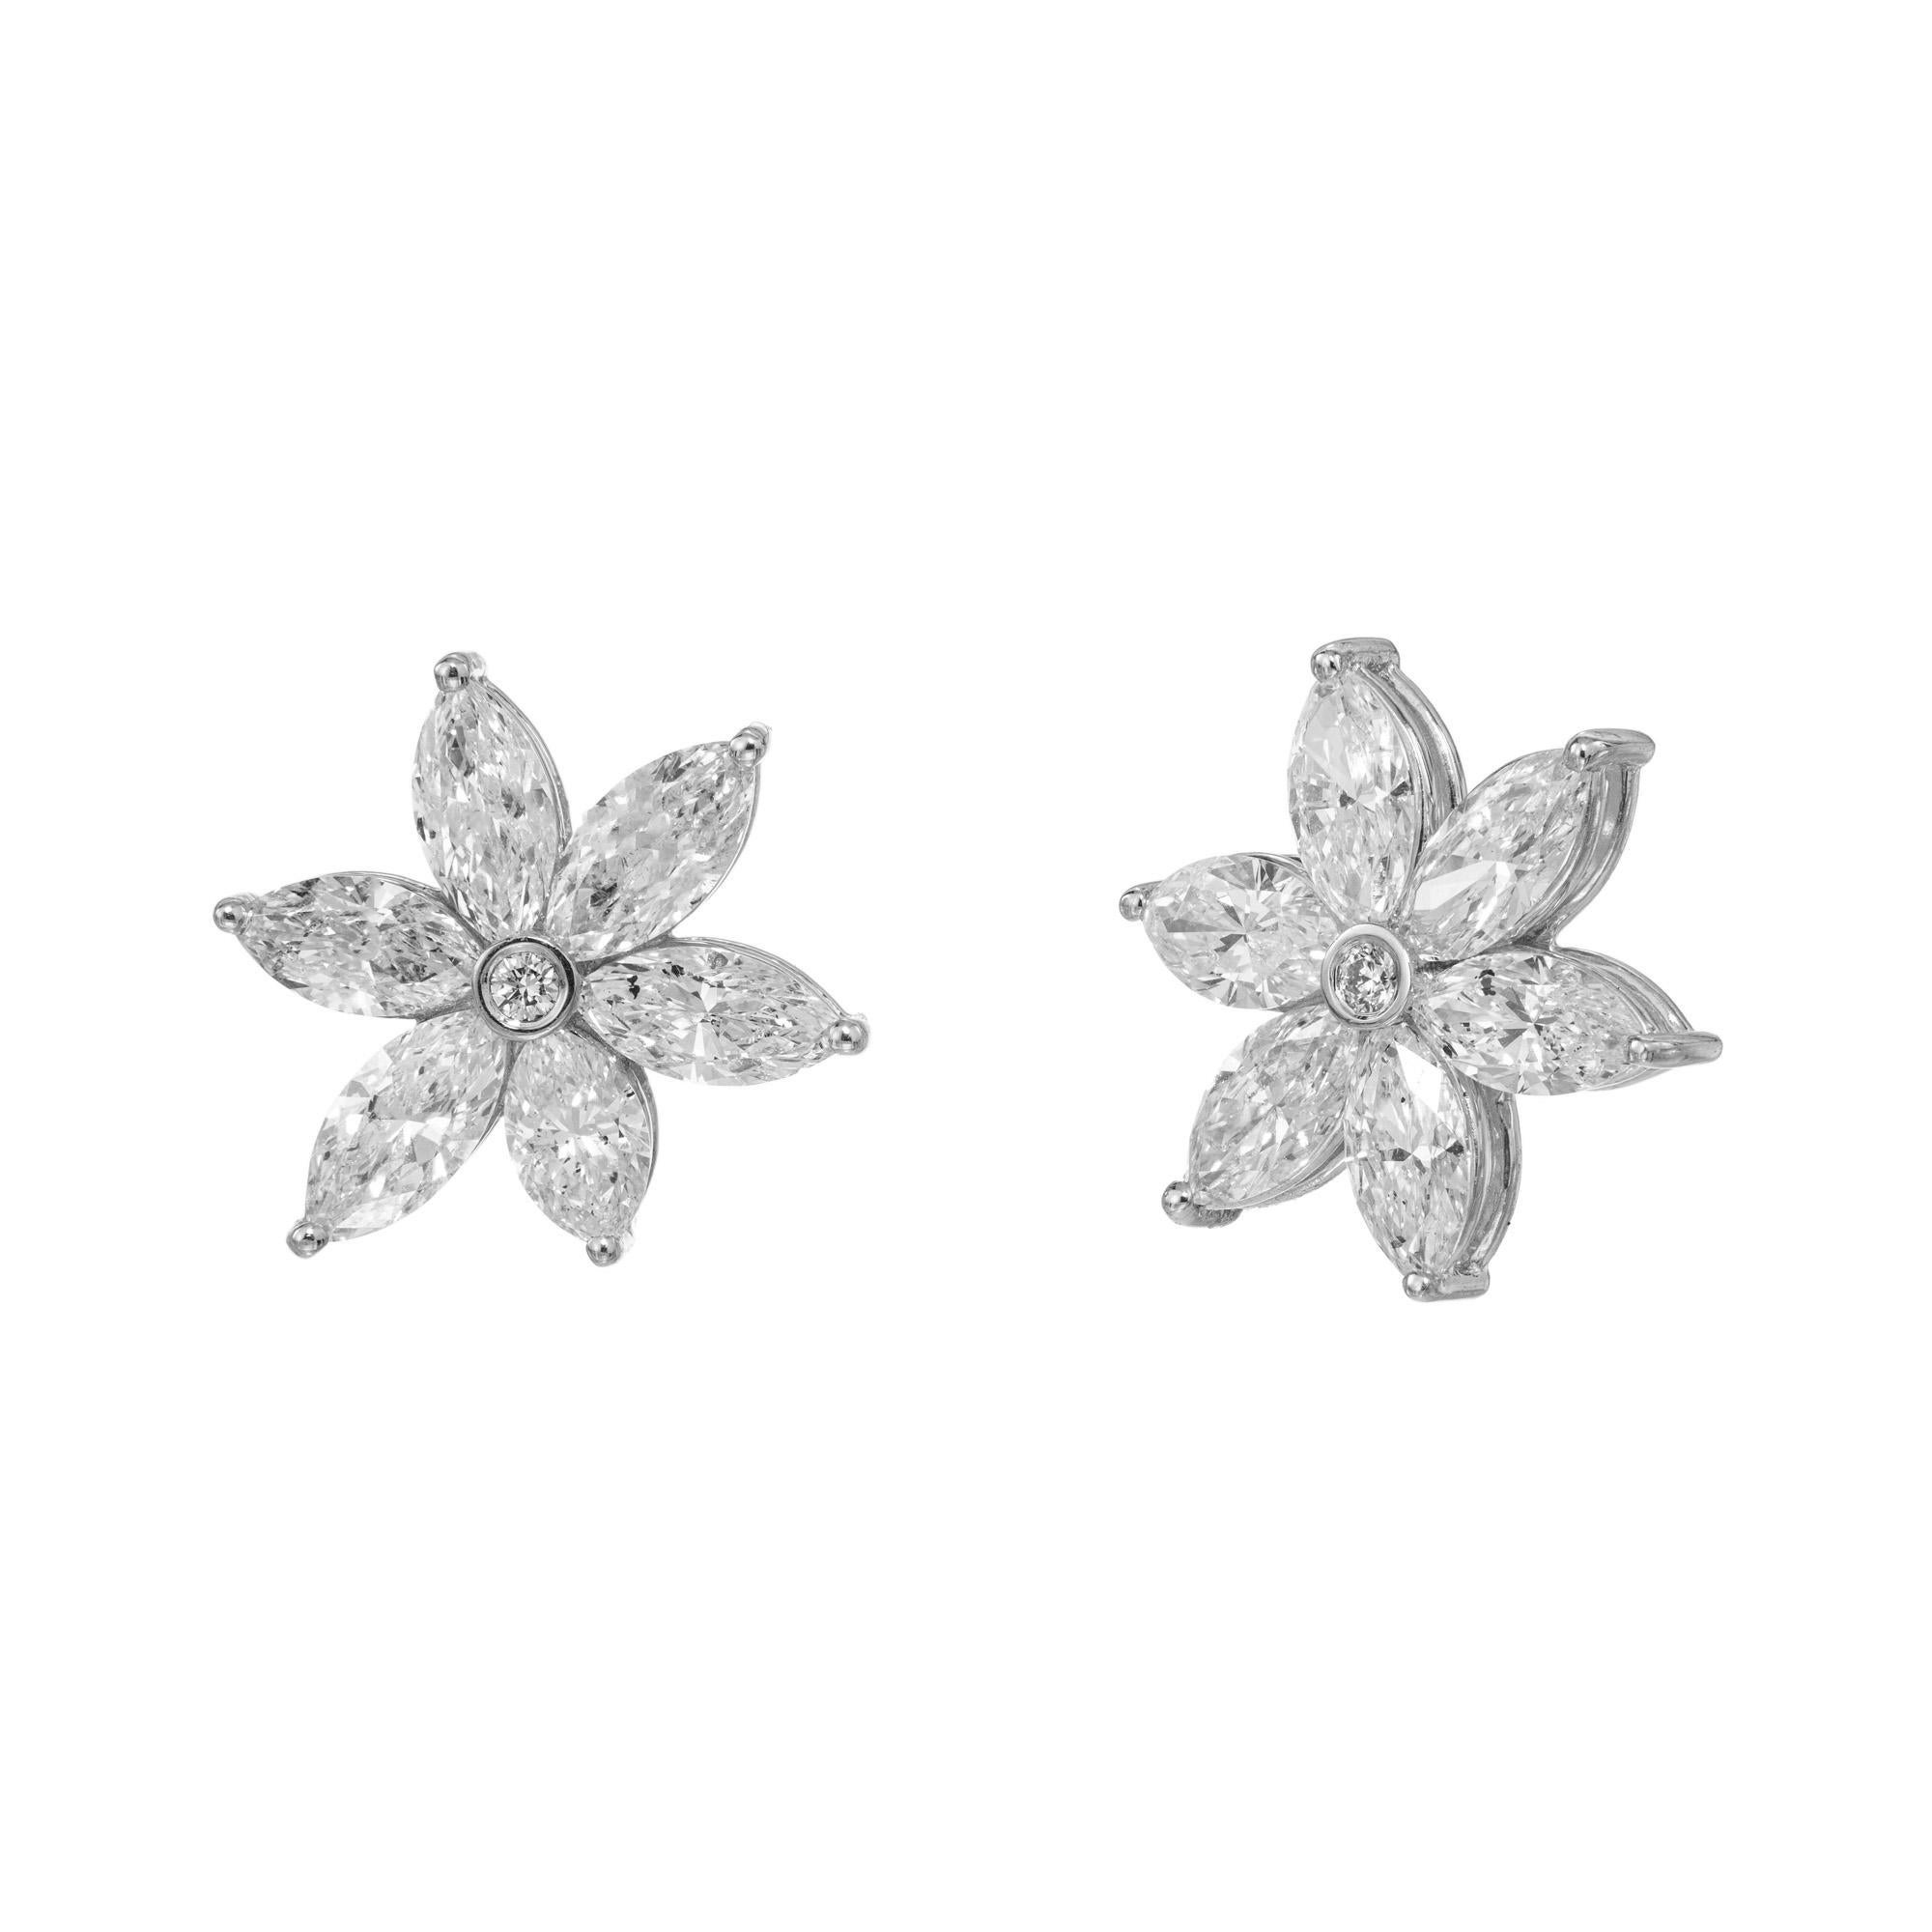 Peter Suchy Jewelers 6.41ct Marquise Diamond Platinum earrings. At the center of these stunning earrings are 2 round bezel set diamonds each accented by 6 marquise diamonds. The 12 marquise have a total carat weight of 6.41cts. Bright and sparkly